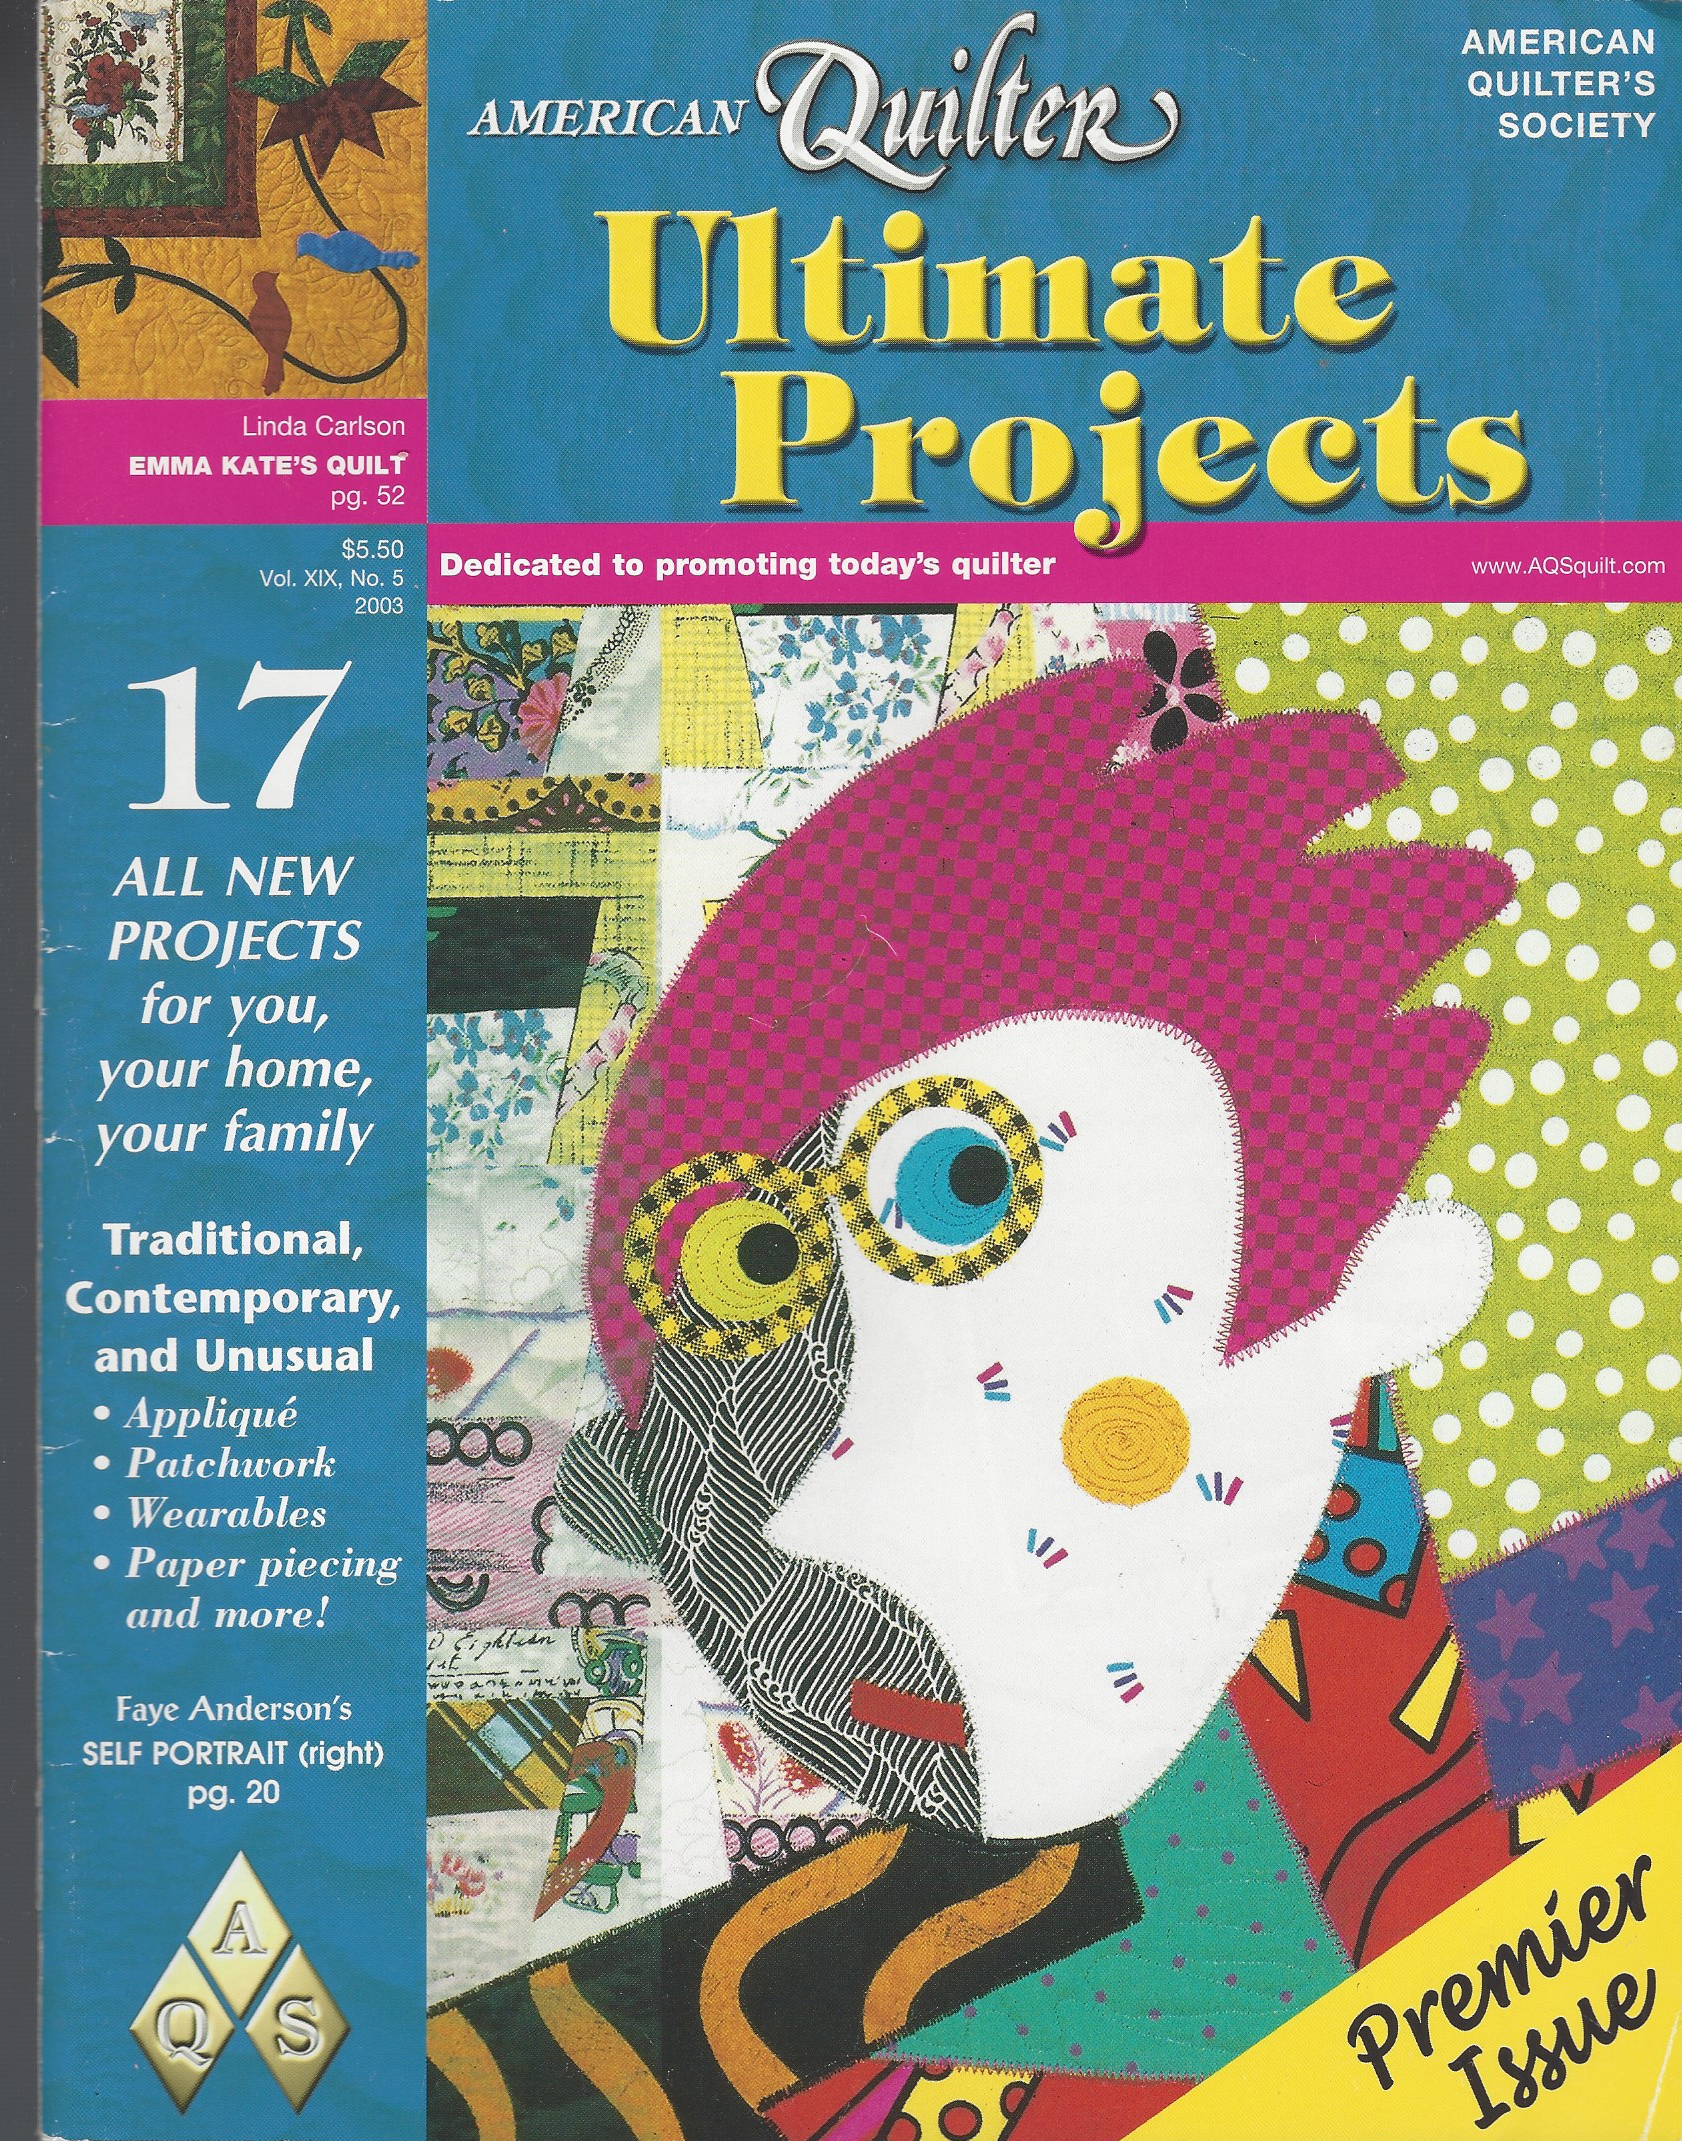 RUSSELL MARJORIE L. , EDITOR - American Quilter Ultimate Projects. Vol. X I X, No. 5, 2003